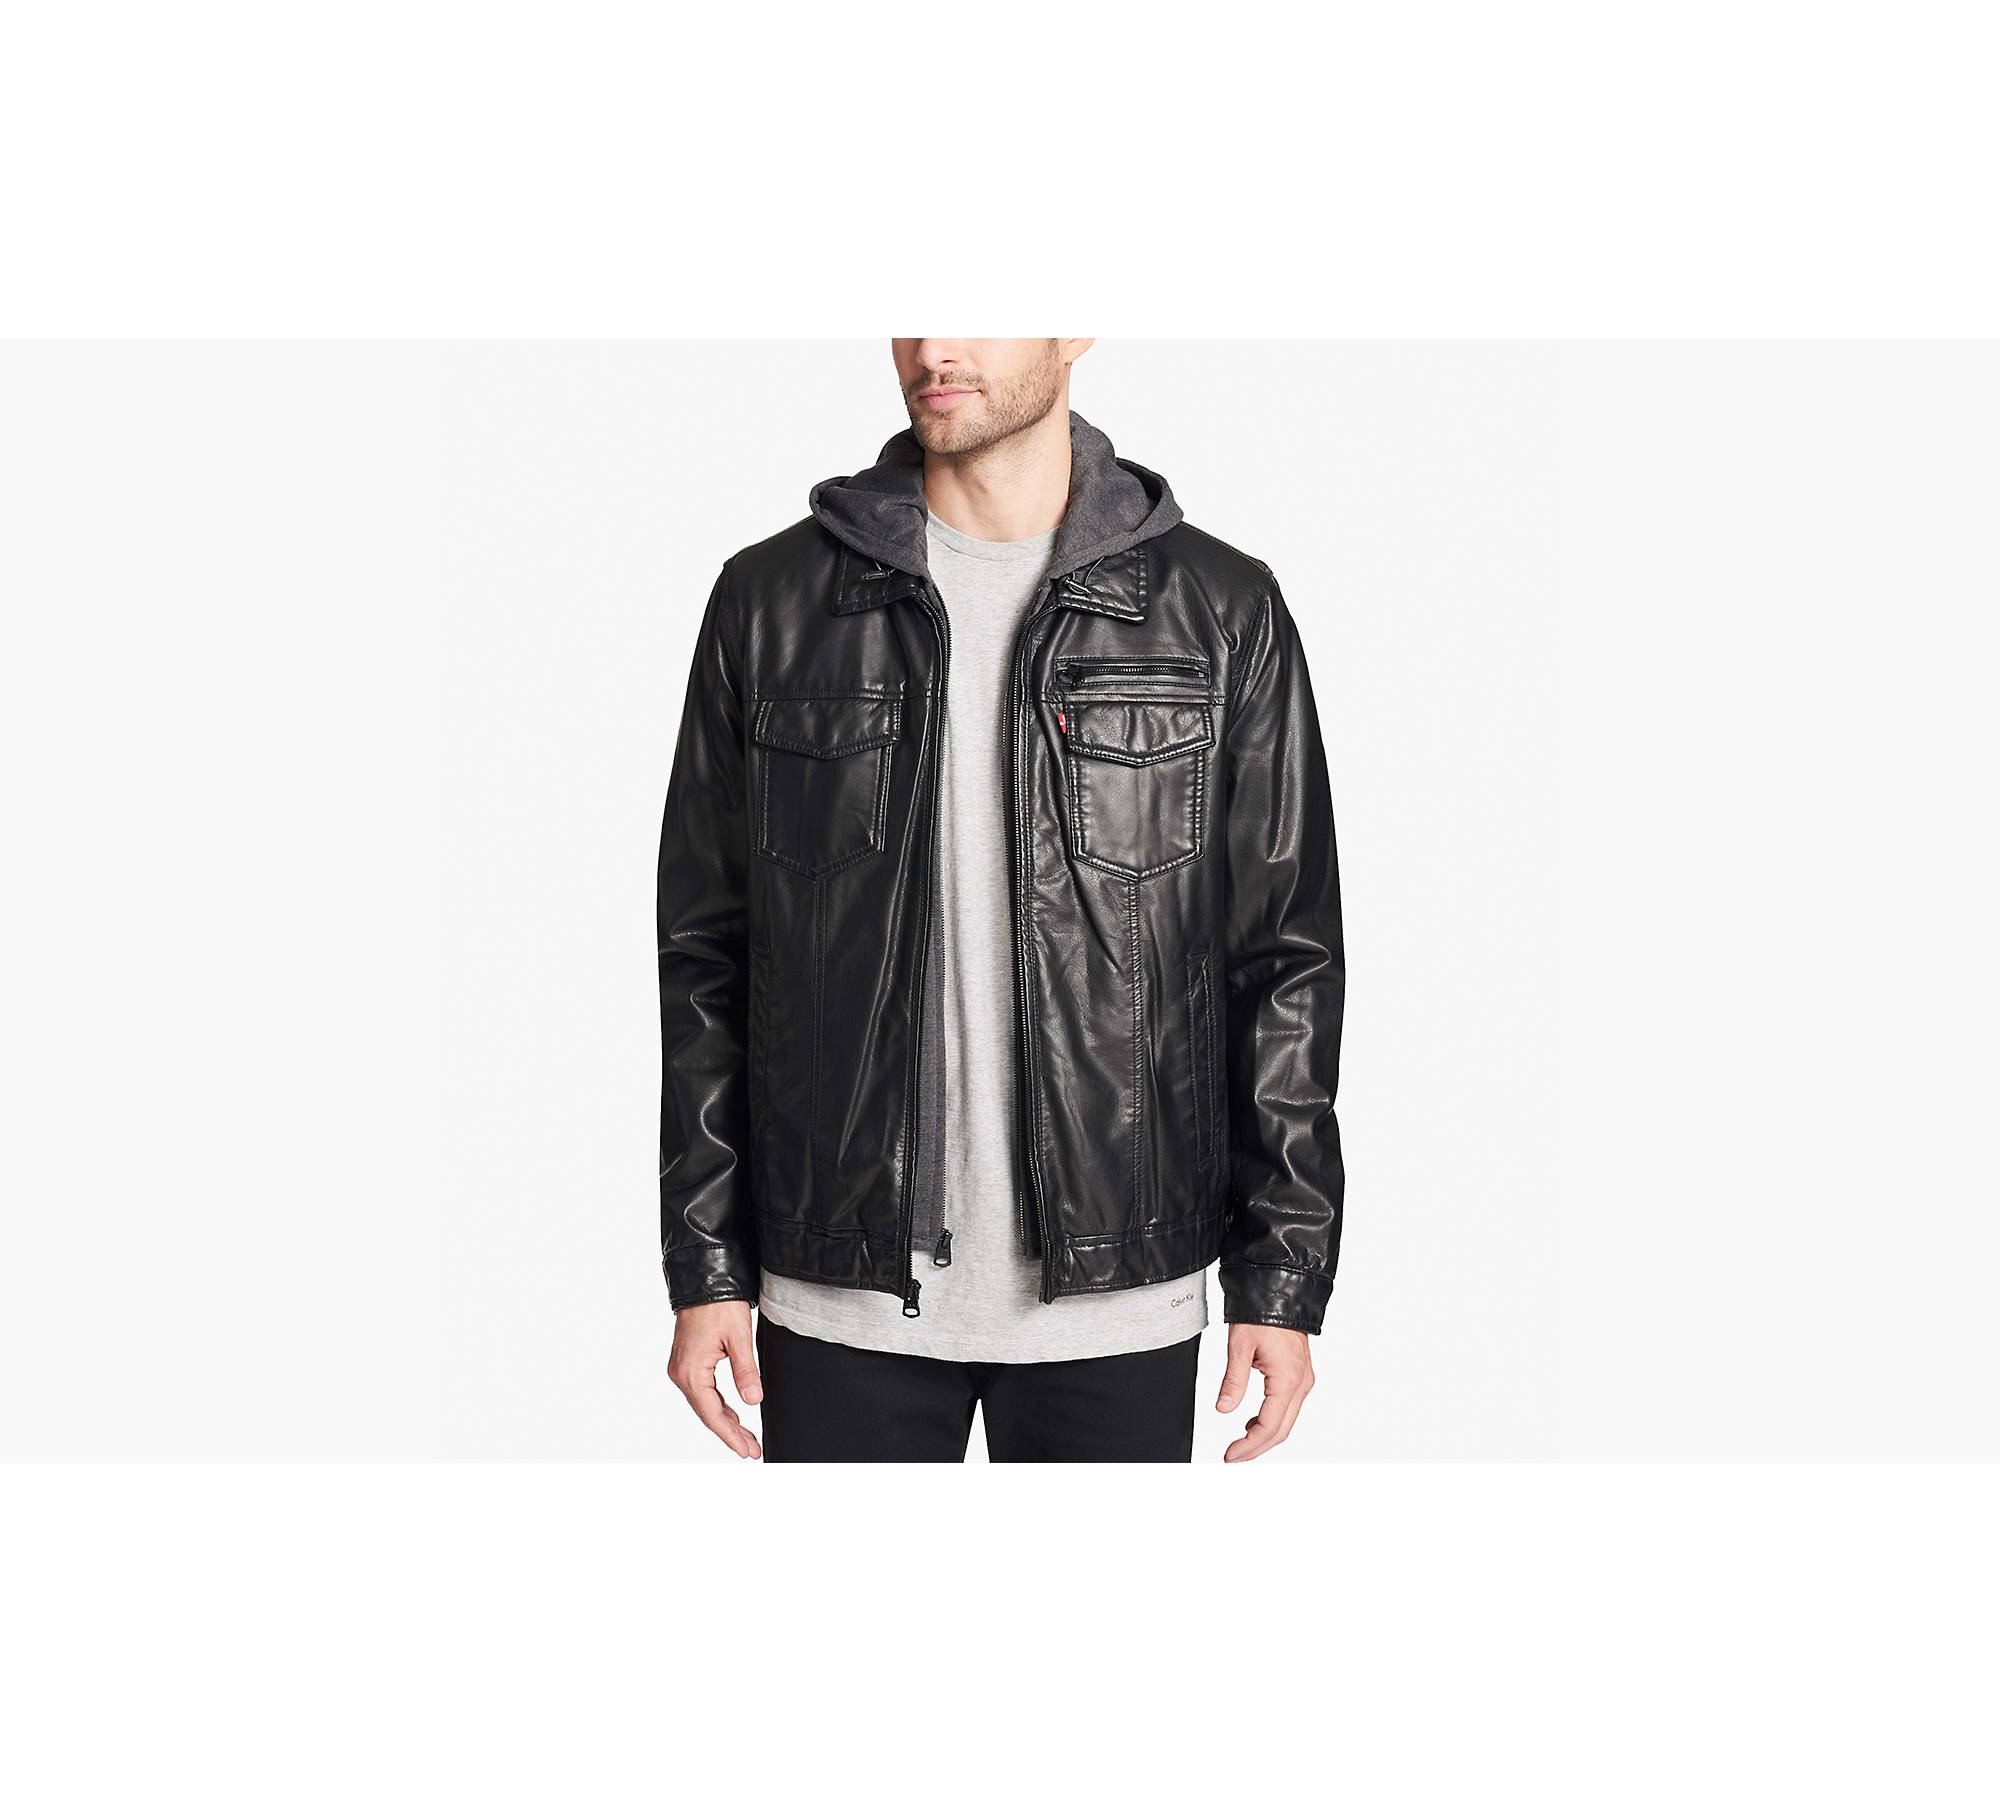 Winter Mens Leather Jackets Cheap Jacket With Inner Fleece Lining